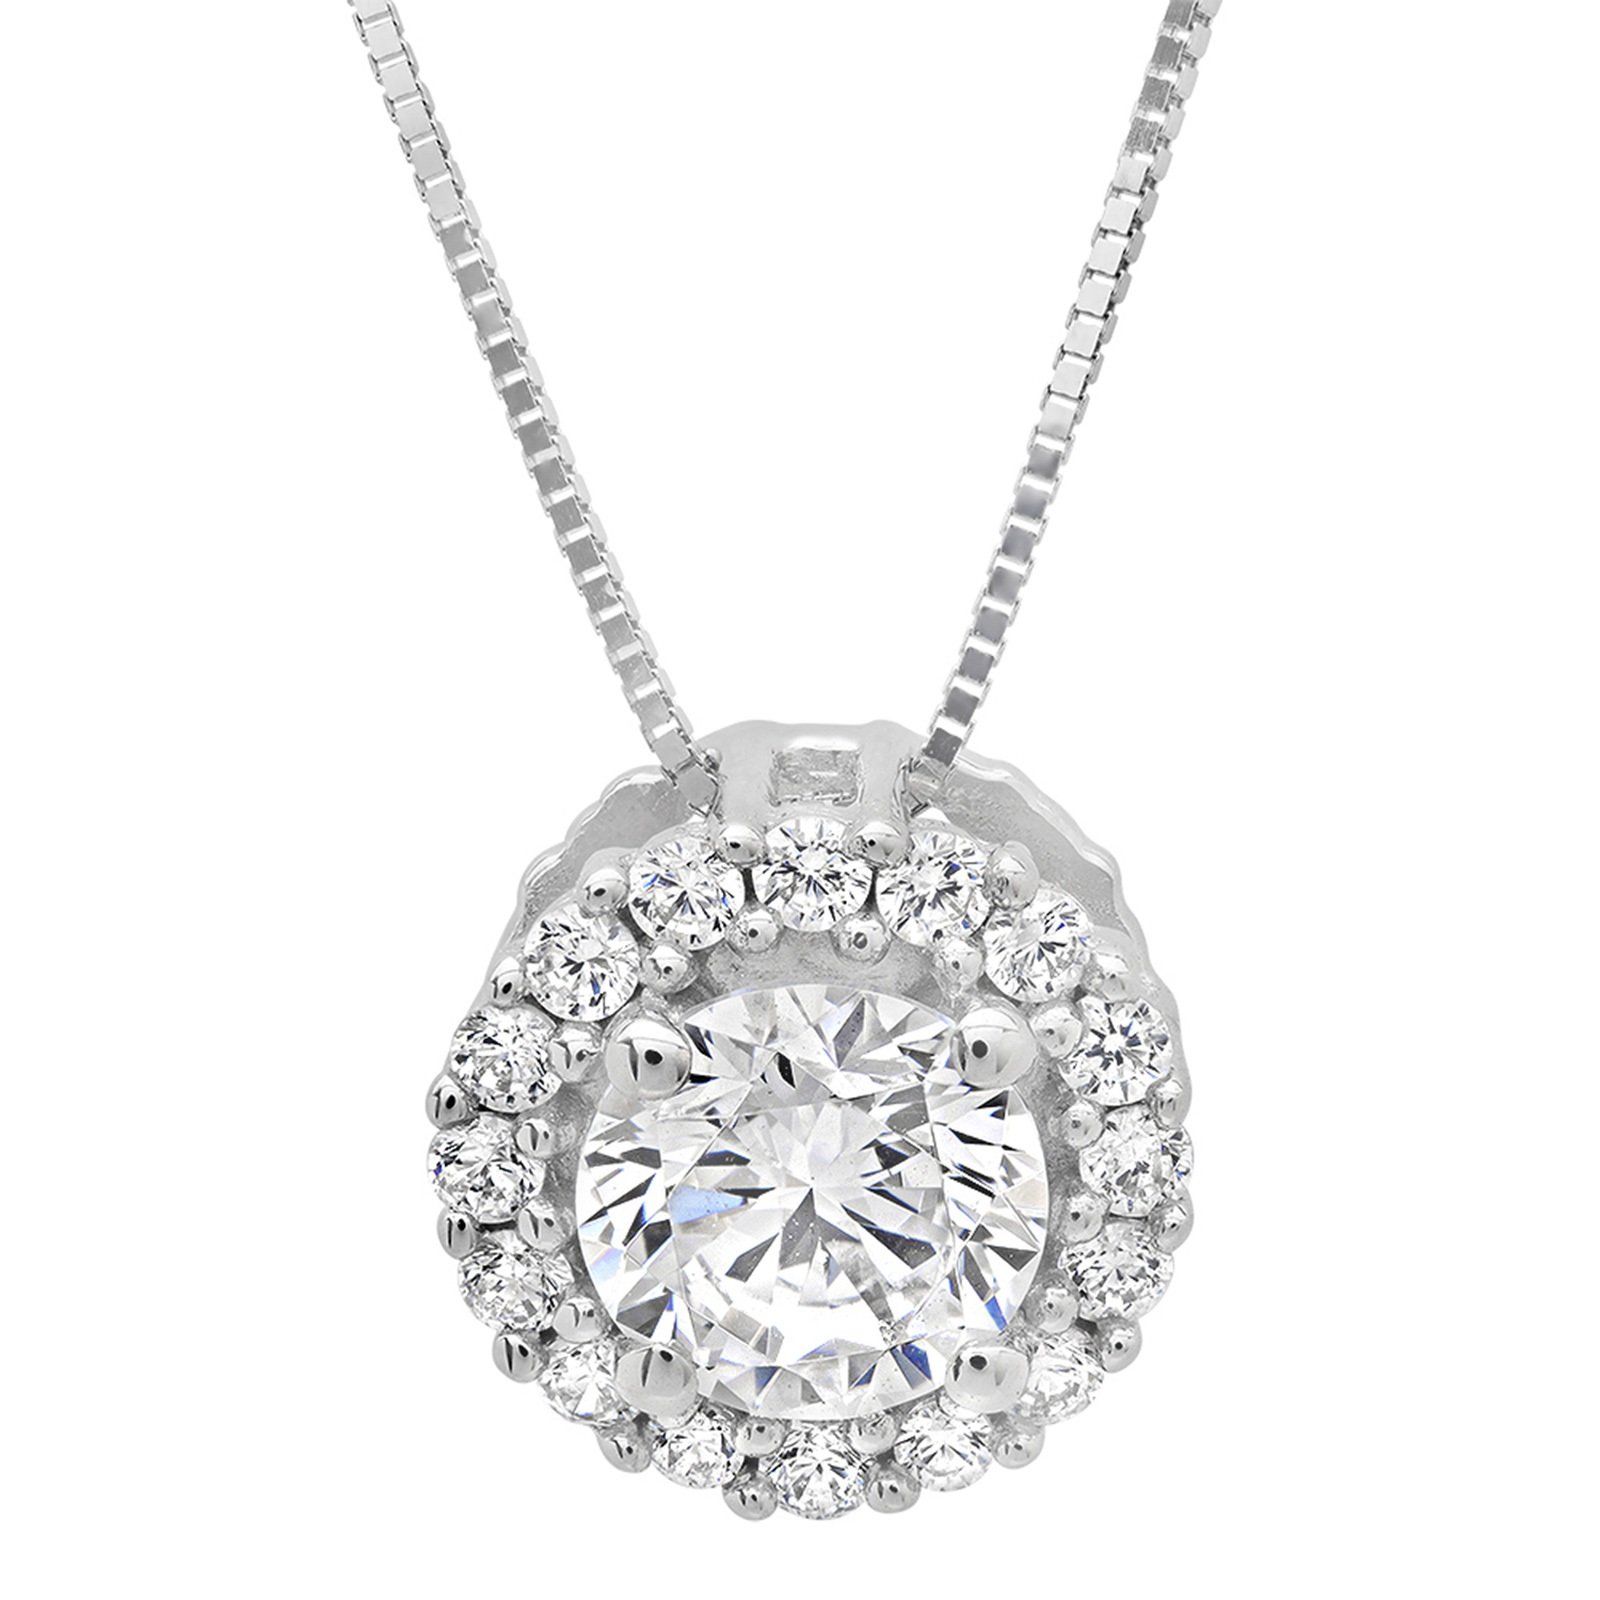 1.35 ct Brilliant Round Cut Pave Halo Stunning Genuine Moissanite Ideal VVS1 D Solitaire Pendant Necklace With 16